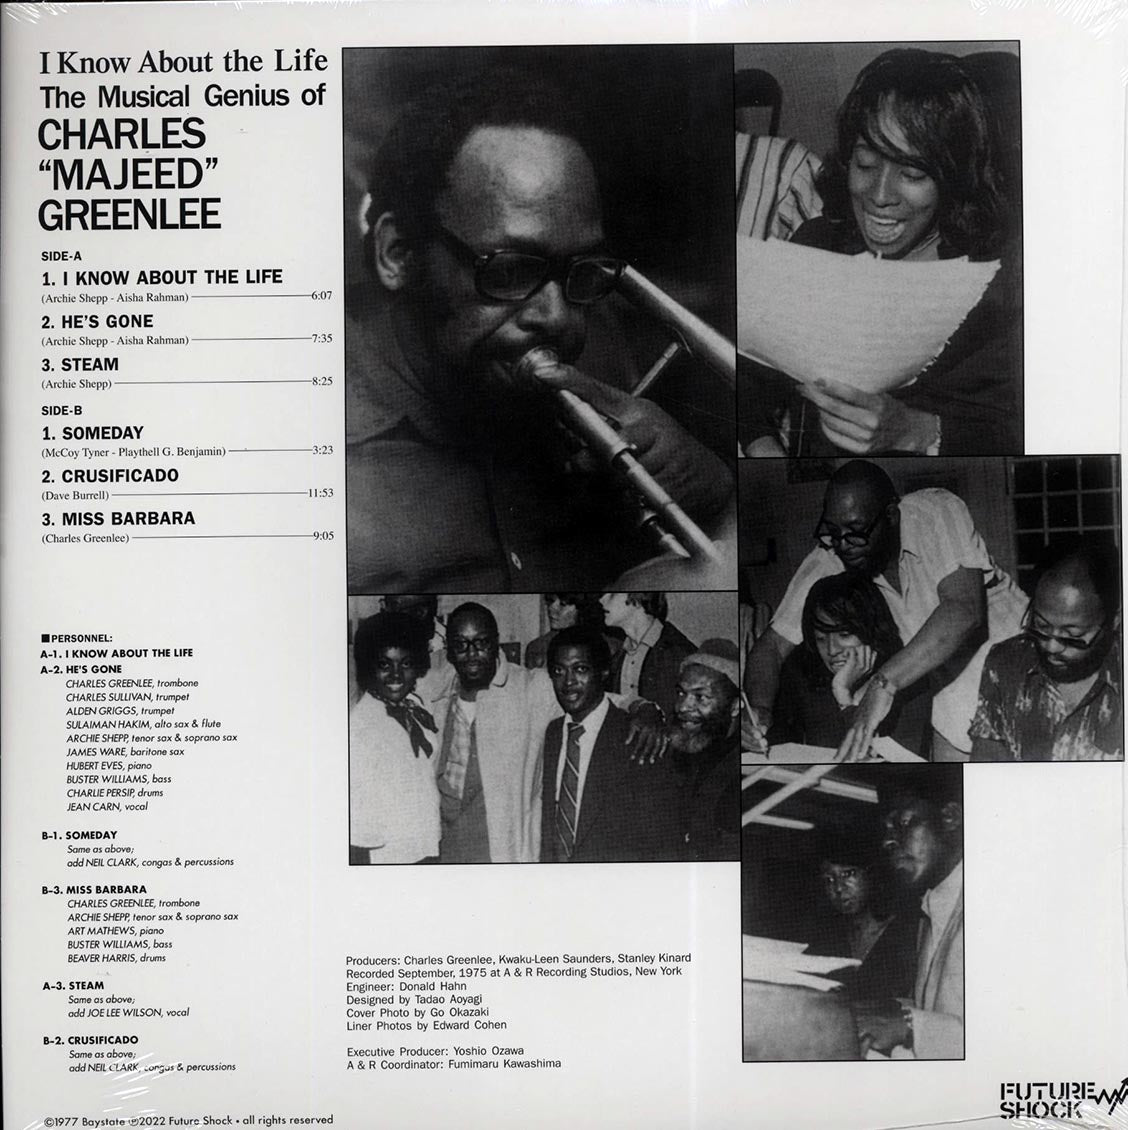 Charles Greenlee - I Know About The Life